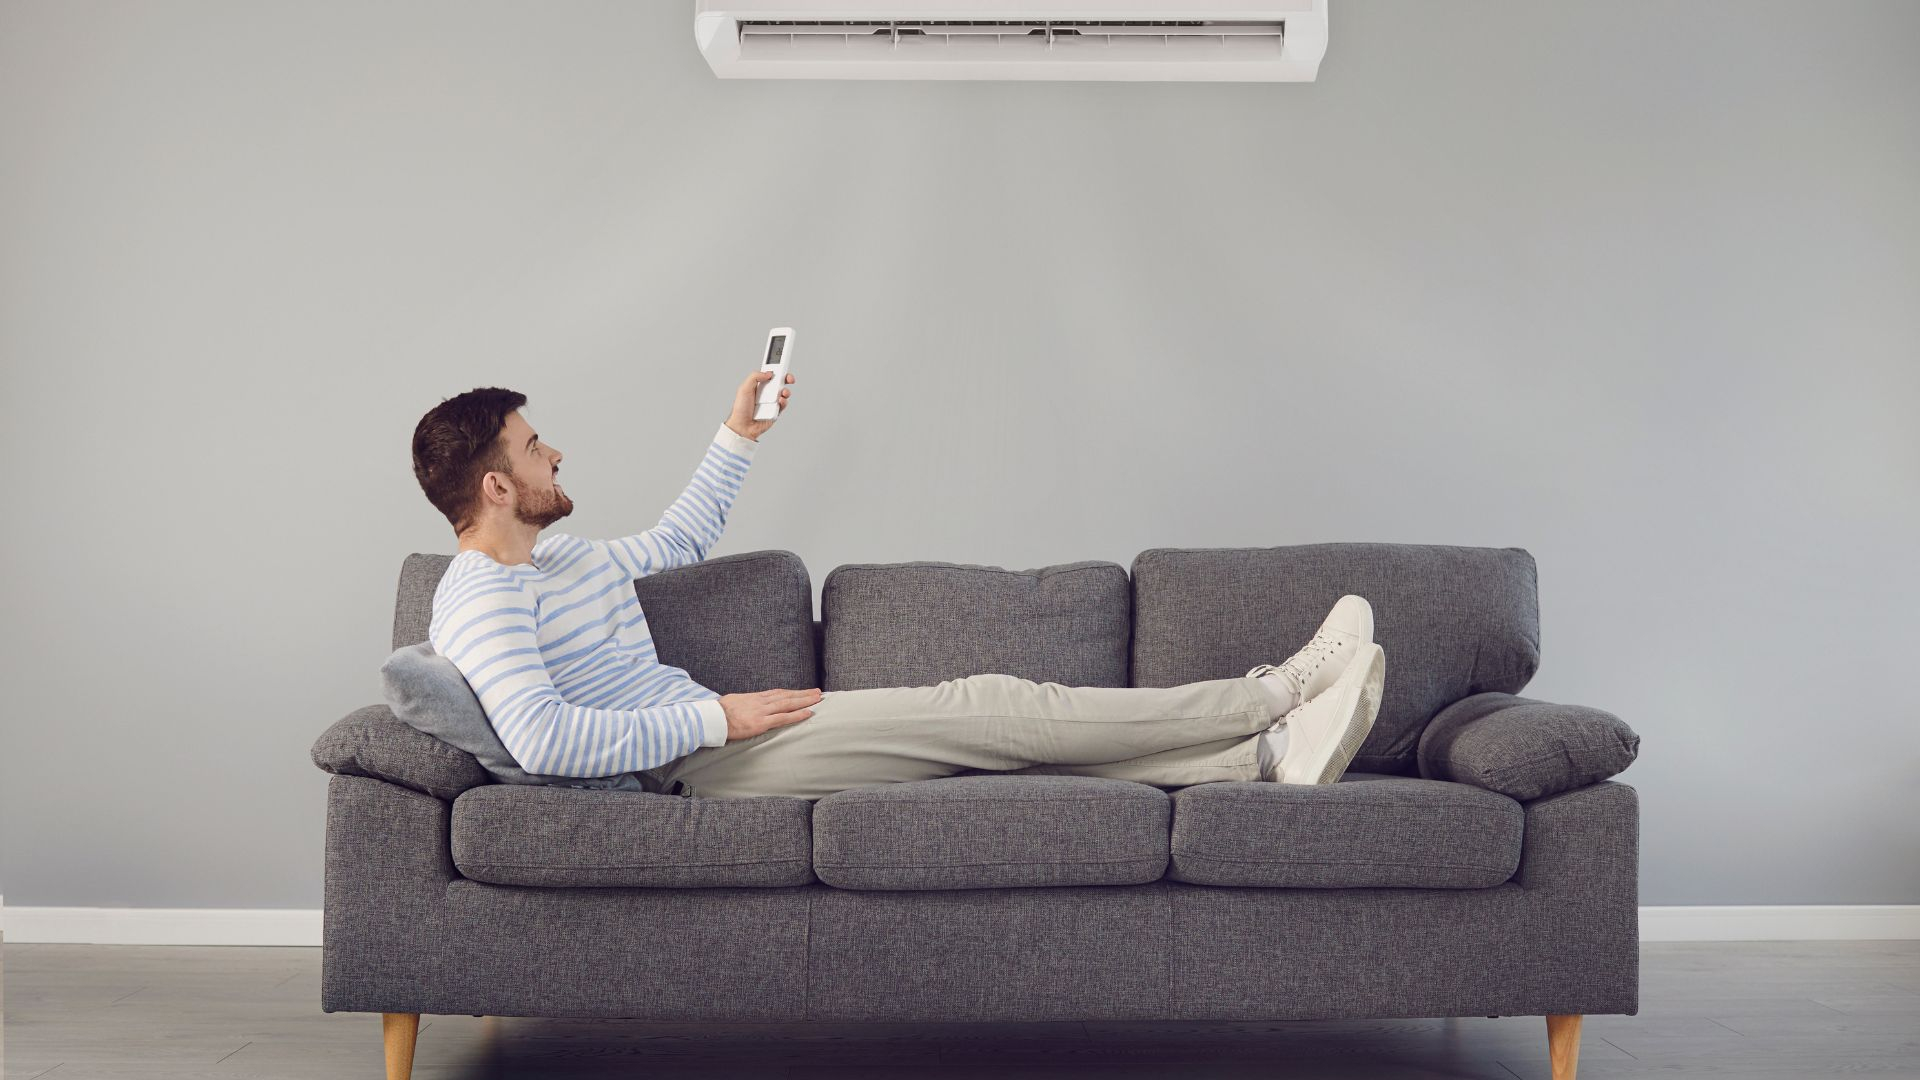 person using AC with remote